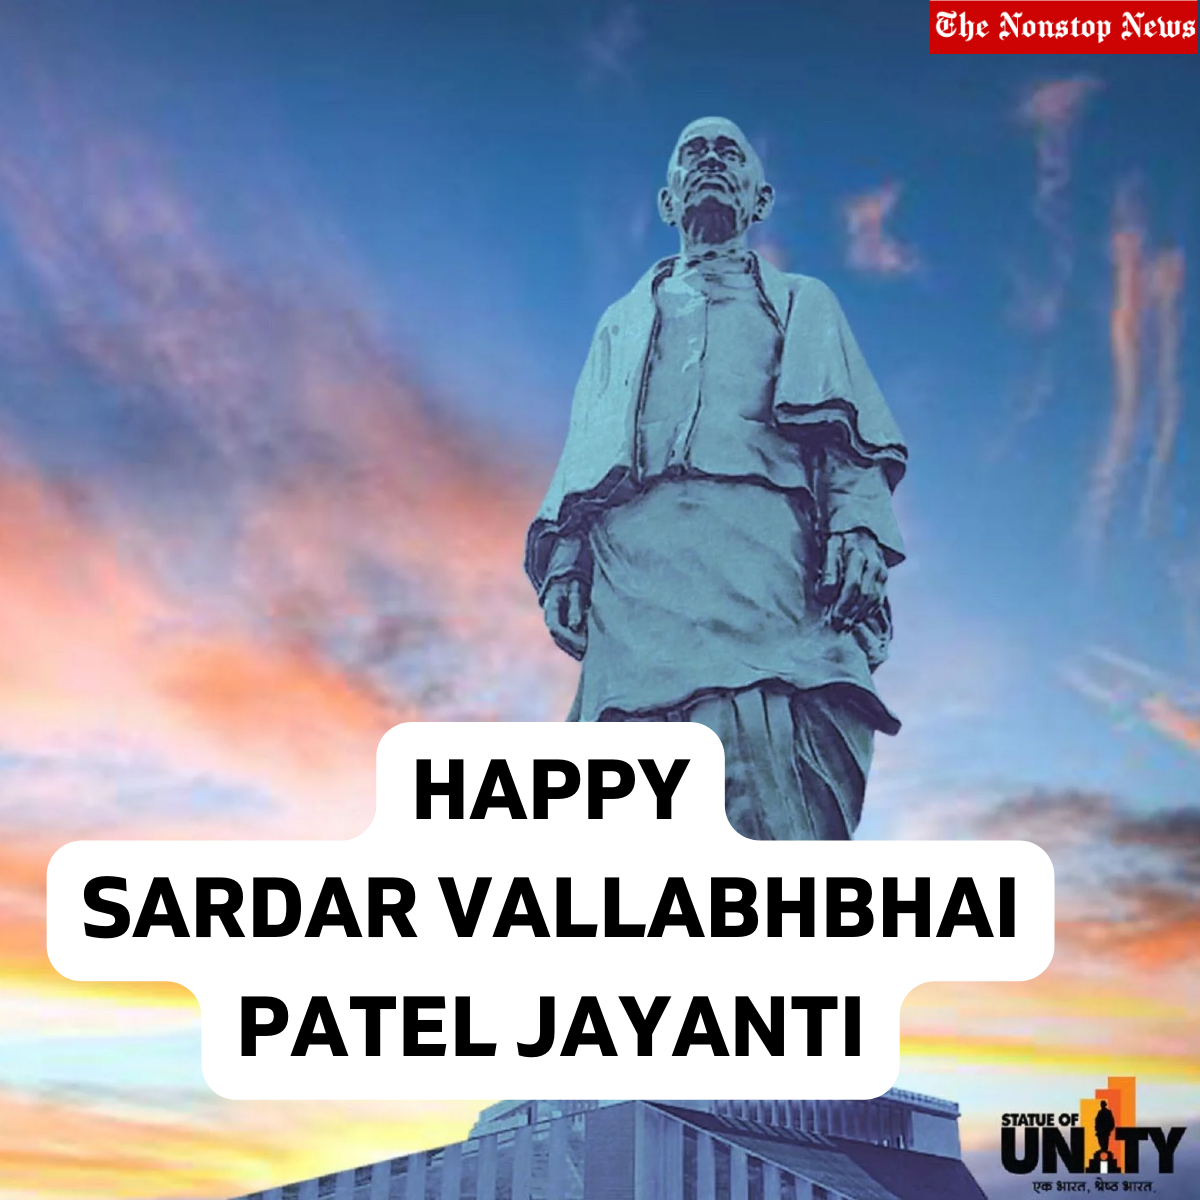 Sardar Vallabhbhai Patel Jayanti Images in Gujarati 2022: Wishes, Greetings, Messages, Quotes, Images and Posters